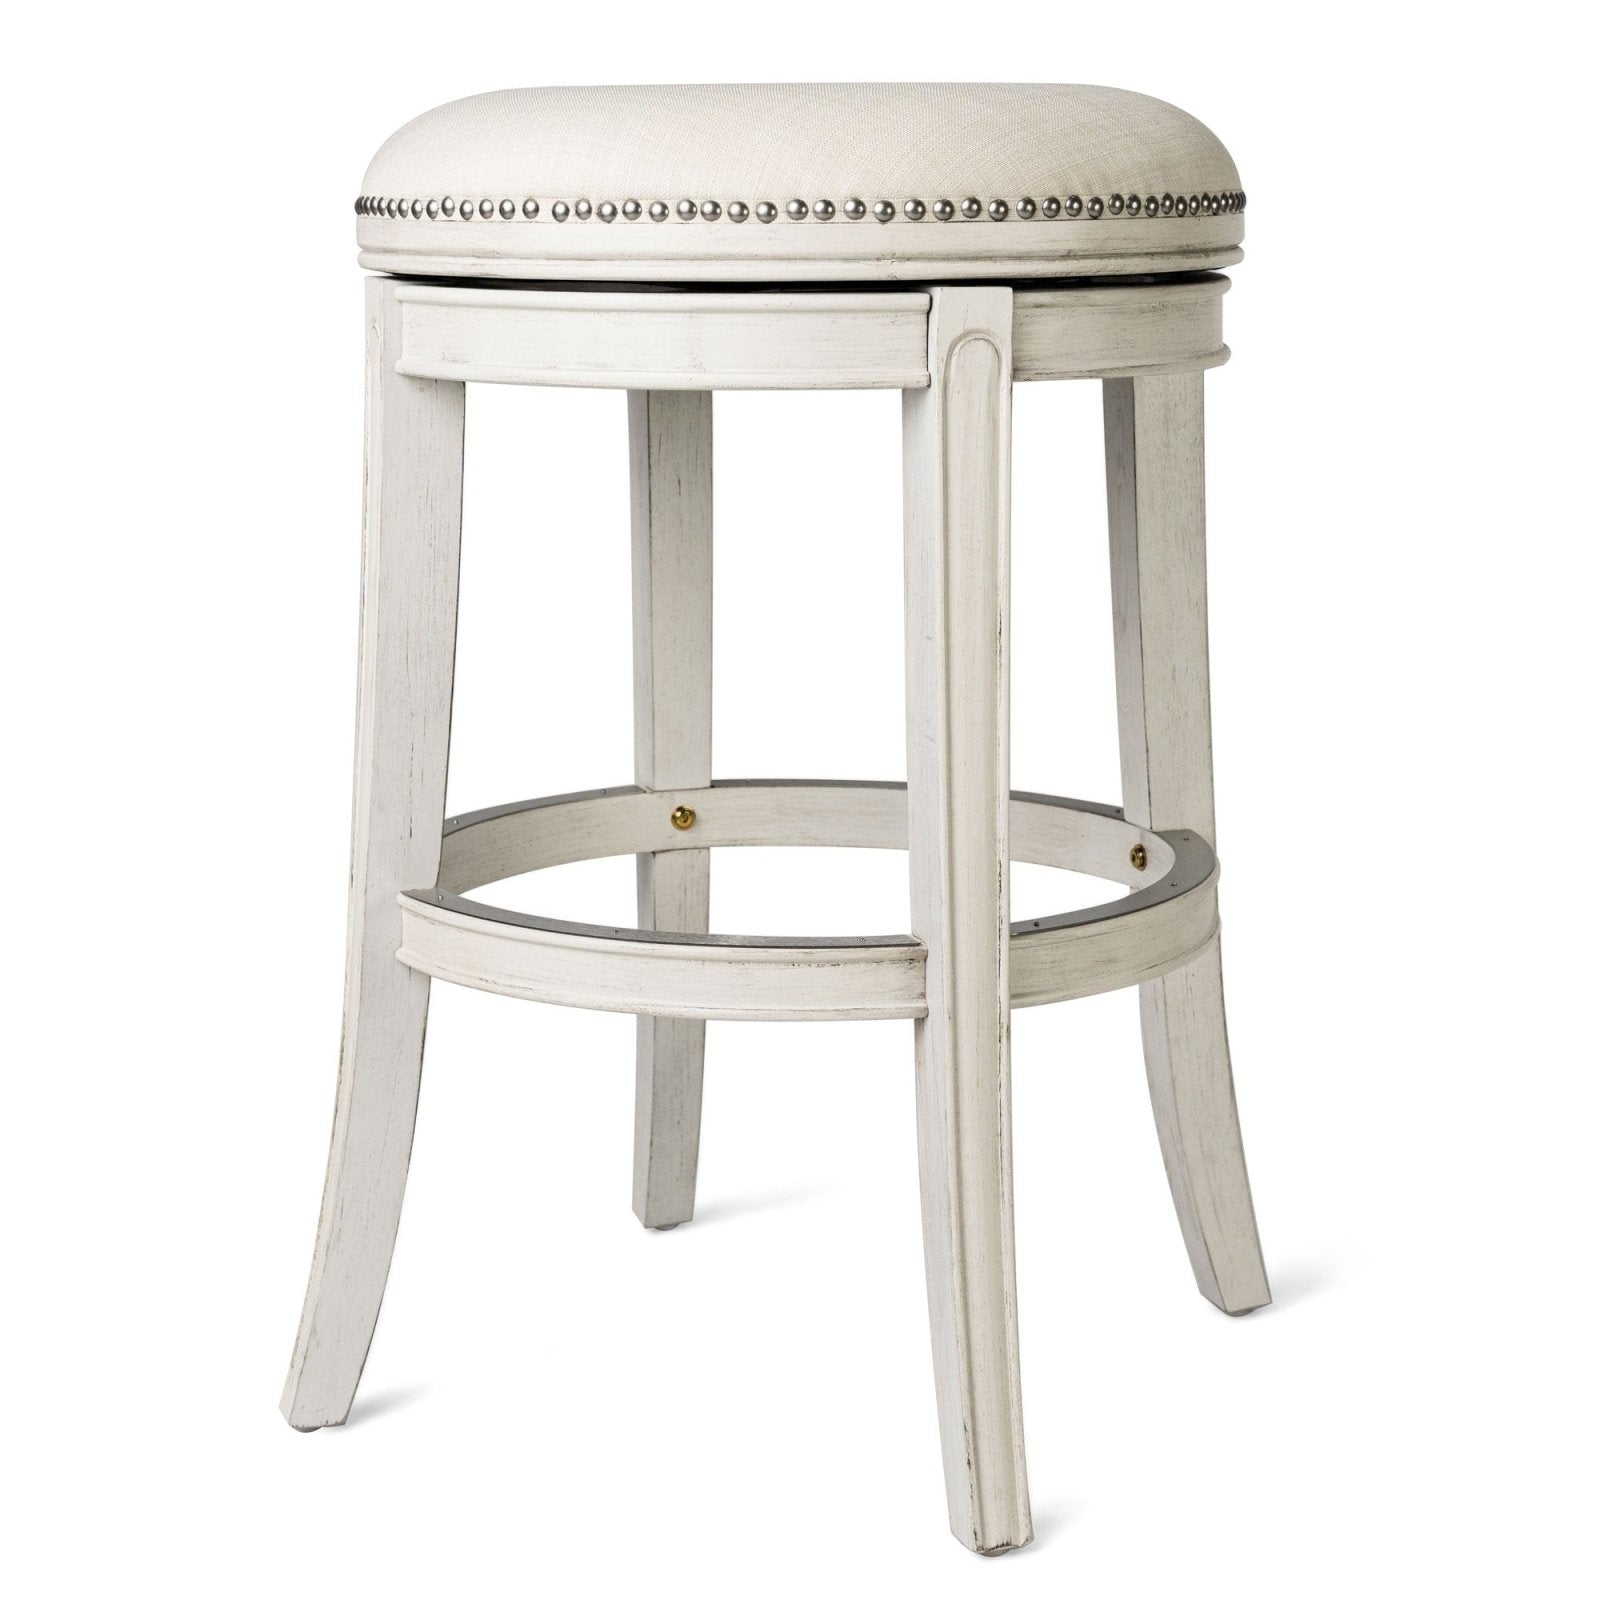 Alexander Backless Bar Stool in White Oak Finish w/ Natural Color Fabric Upholstery